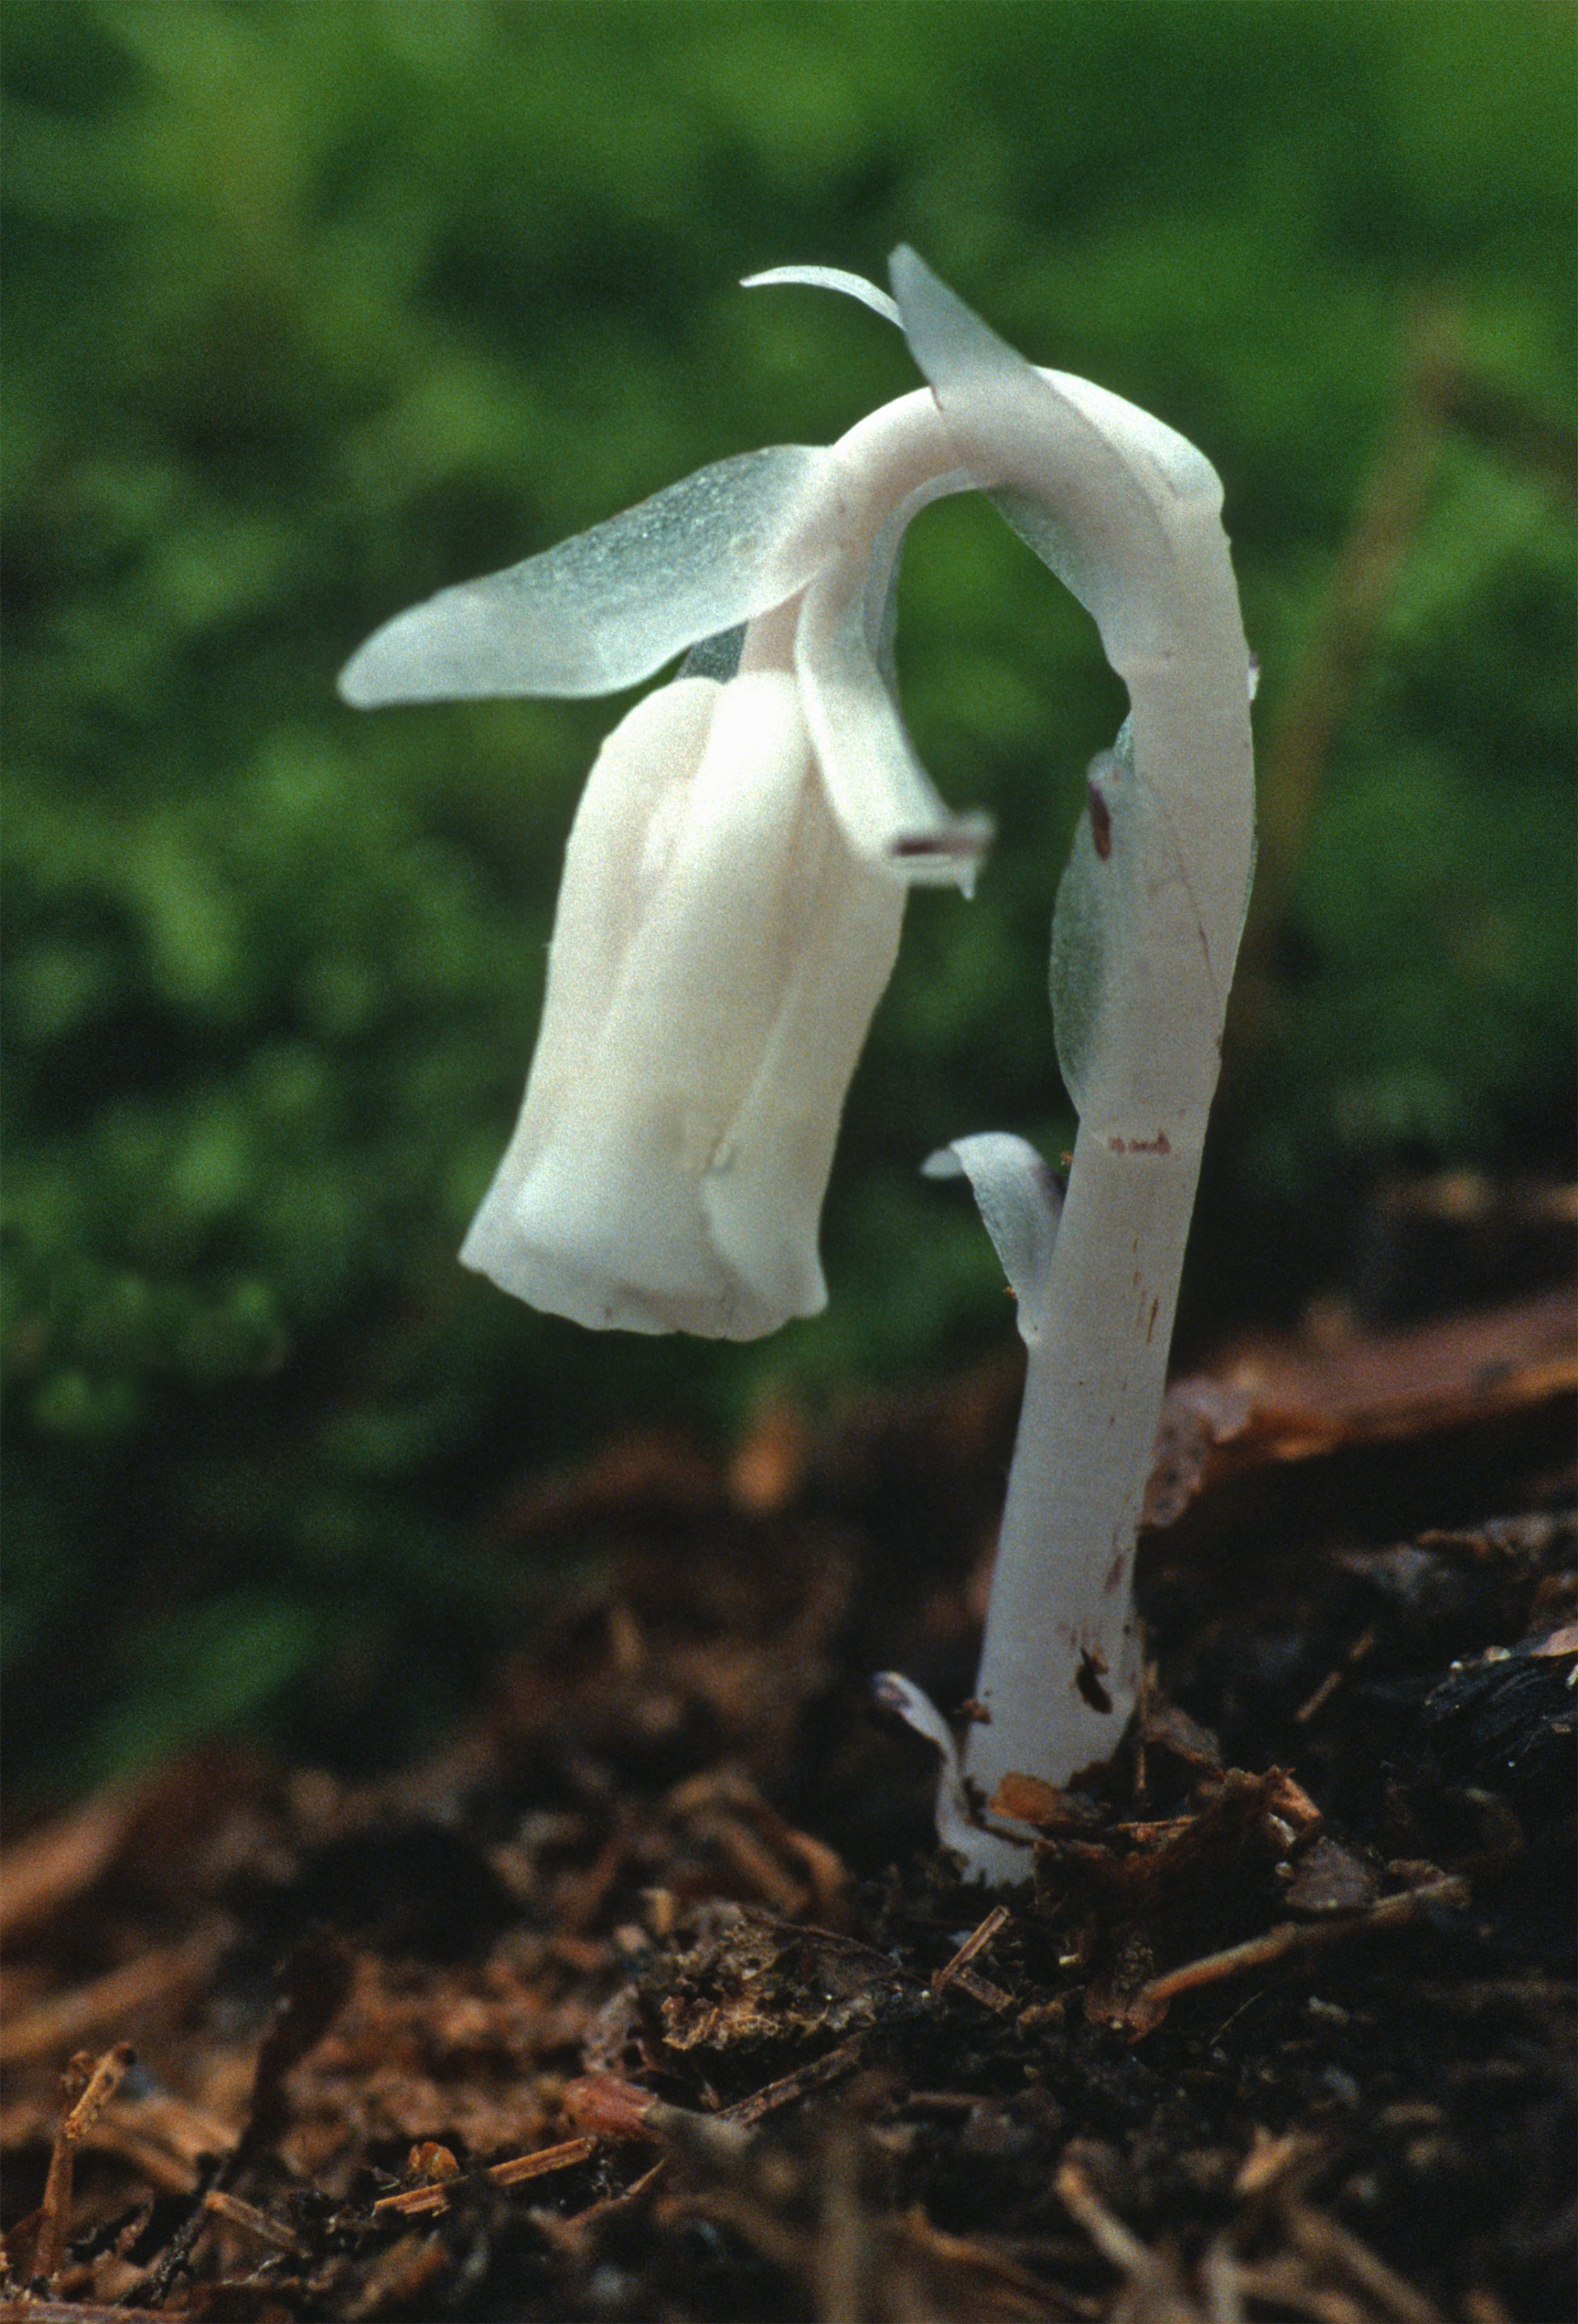 The Scientific Name is Monotropa uniflora. You will likely hear them called Indian Pipes, One-flowered Indian-pipes. This picture shows the Has a single flower which nods down from the top of the stem. of Monotropa uniflora